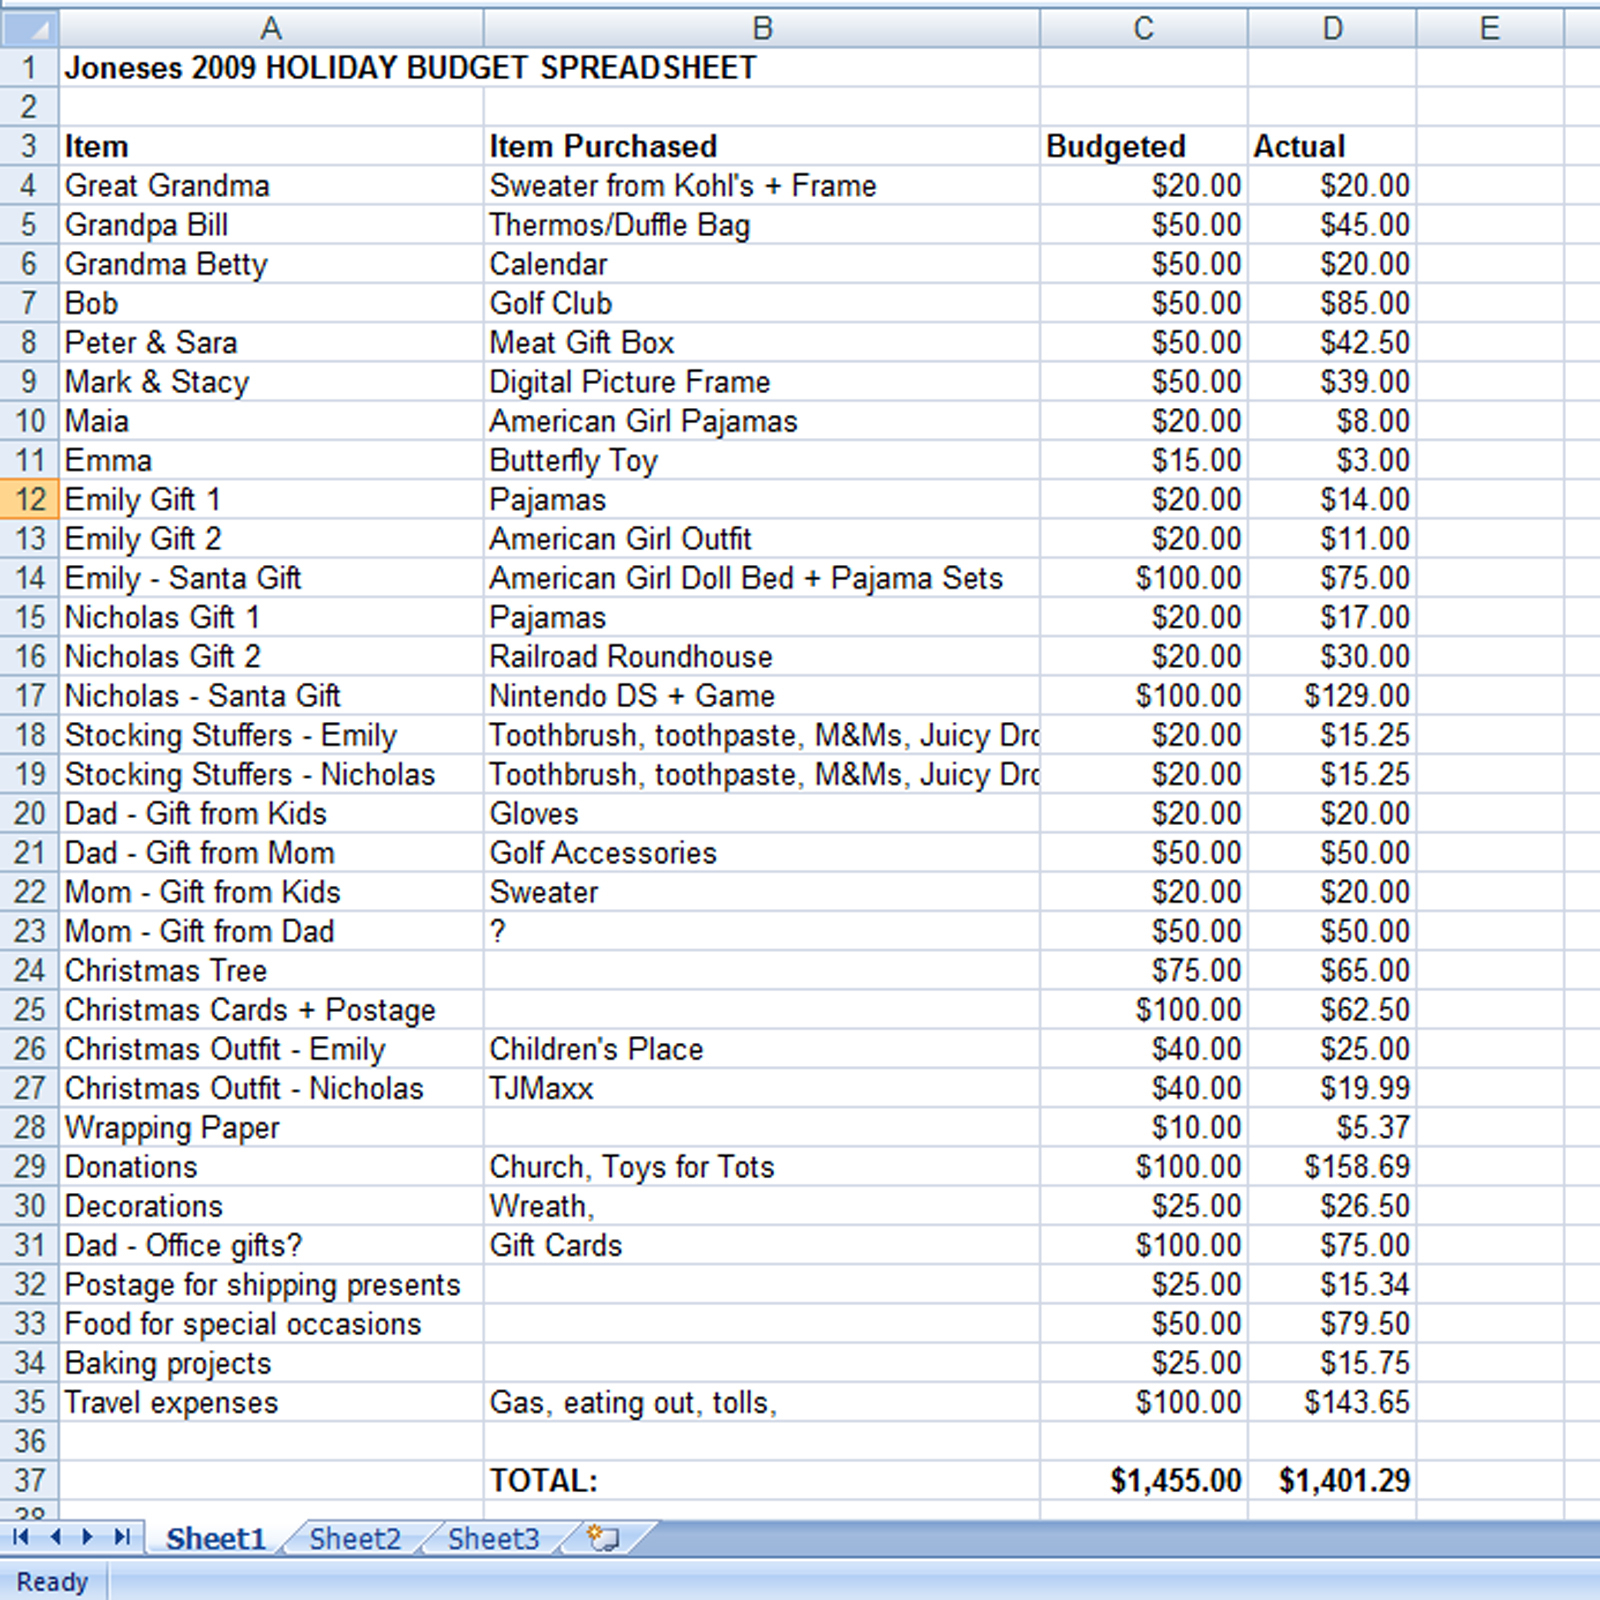 Grocery Expenses Spreadsheet Regarding Spreadsheet Track Grocery Spending List Down Your Weekly Expenses